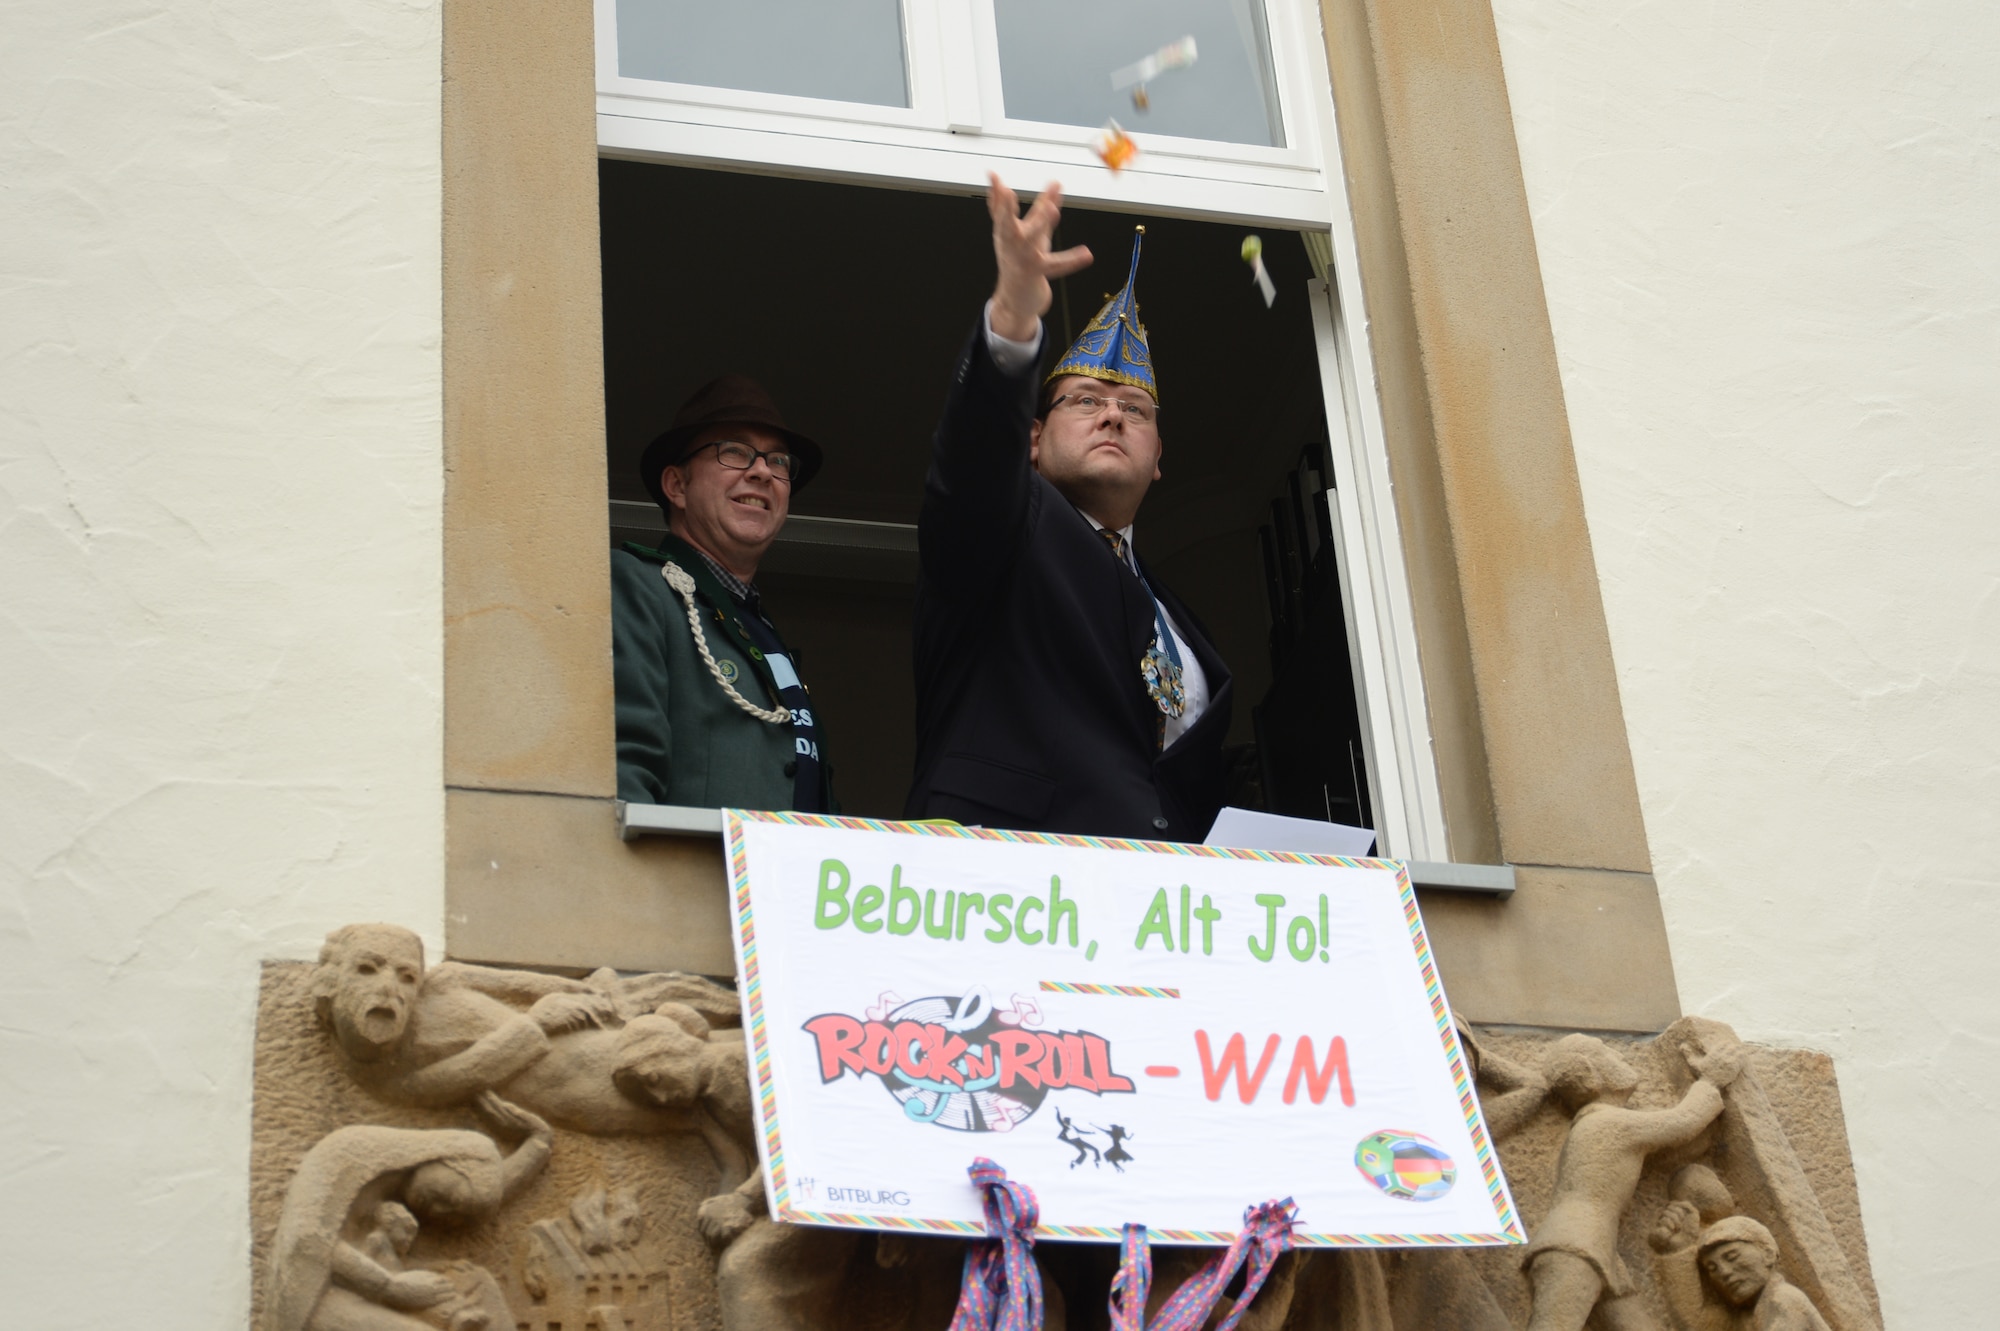 Joachim Kandels, mayor of Bitburg  throws candy to revelers on the street corner below during a Fasching celebration at his city hall in Bitburg, Germany, Feb. 27, 2014. Kandels oversaw the Fasching tradition of the storming of the city hall by female citizens. (U.S. Air Force photo by Staff Sgt. Joe W. McFadden/Released)